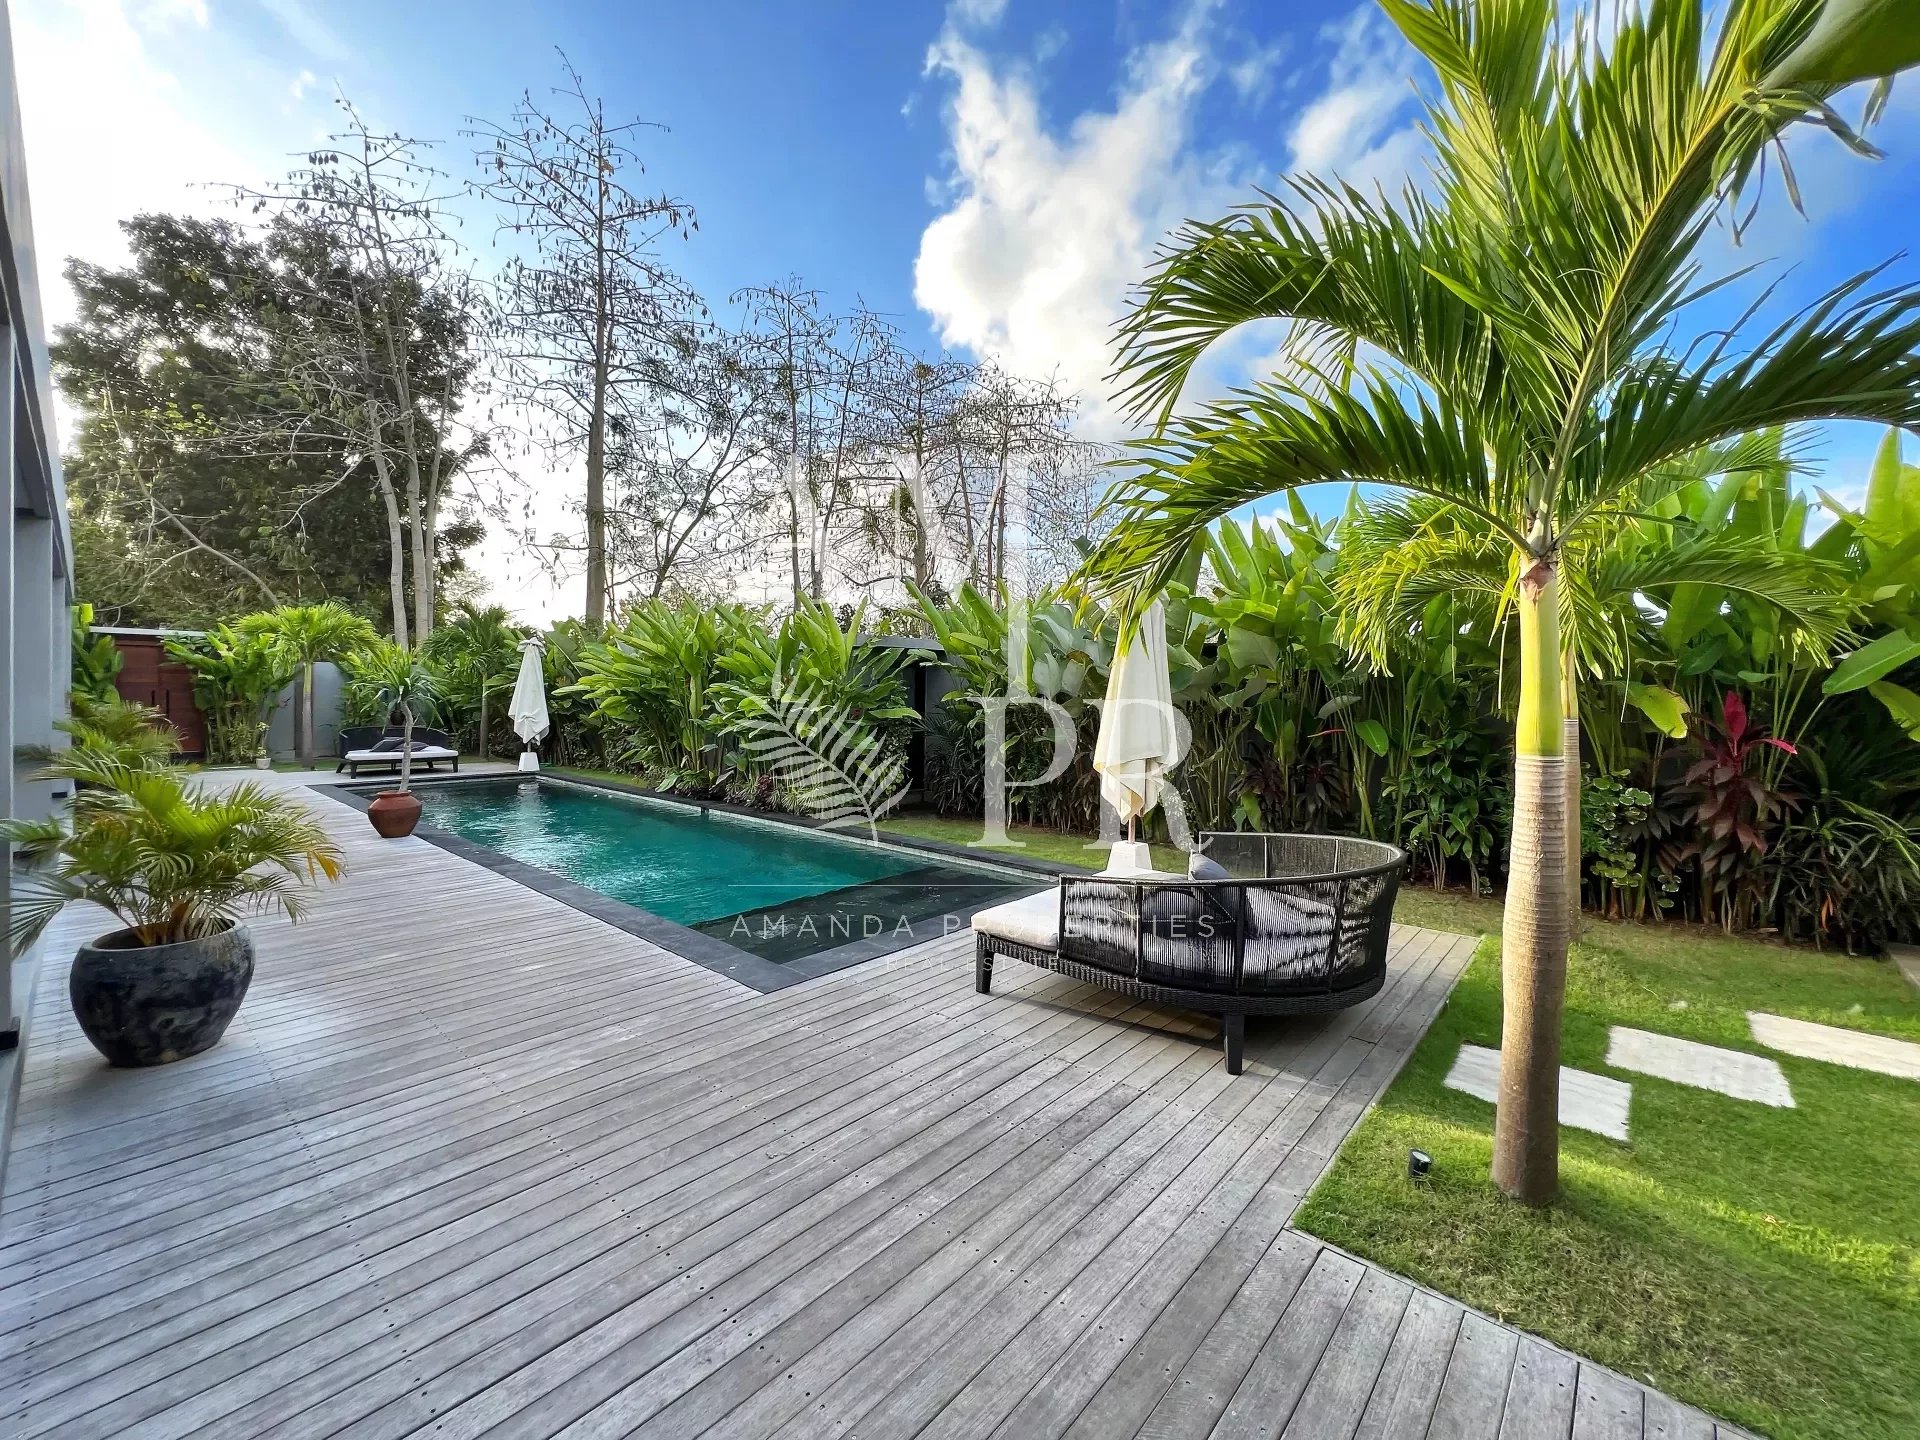 Villa with 4 Bedroom & Pool - Your paradise in Bali